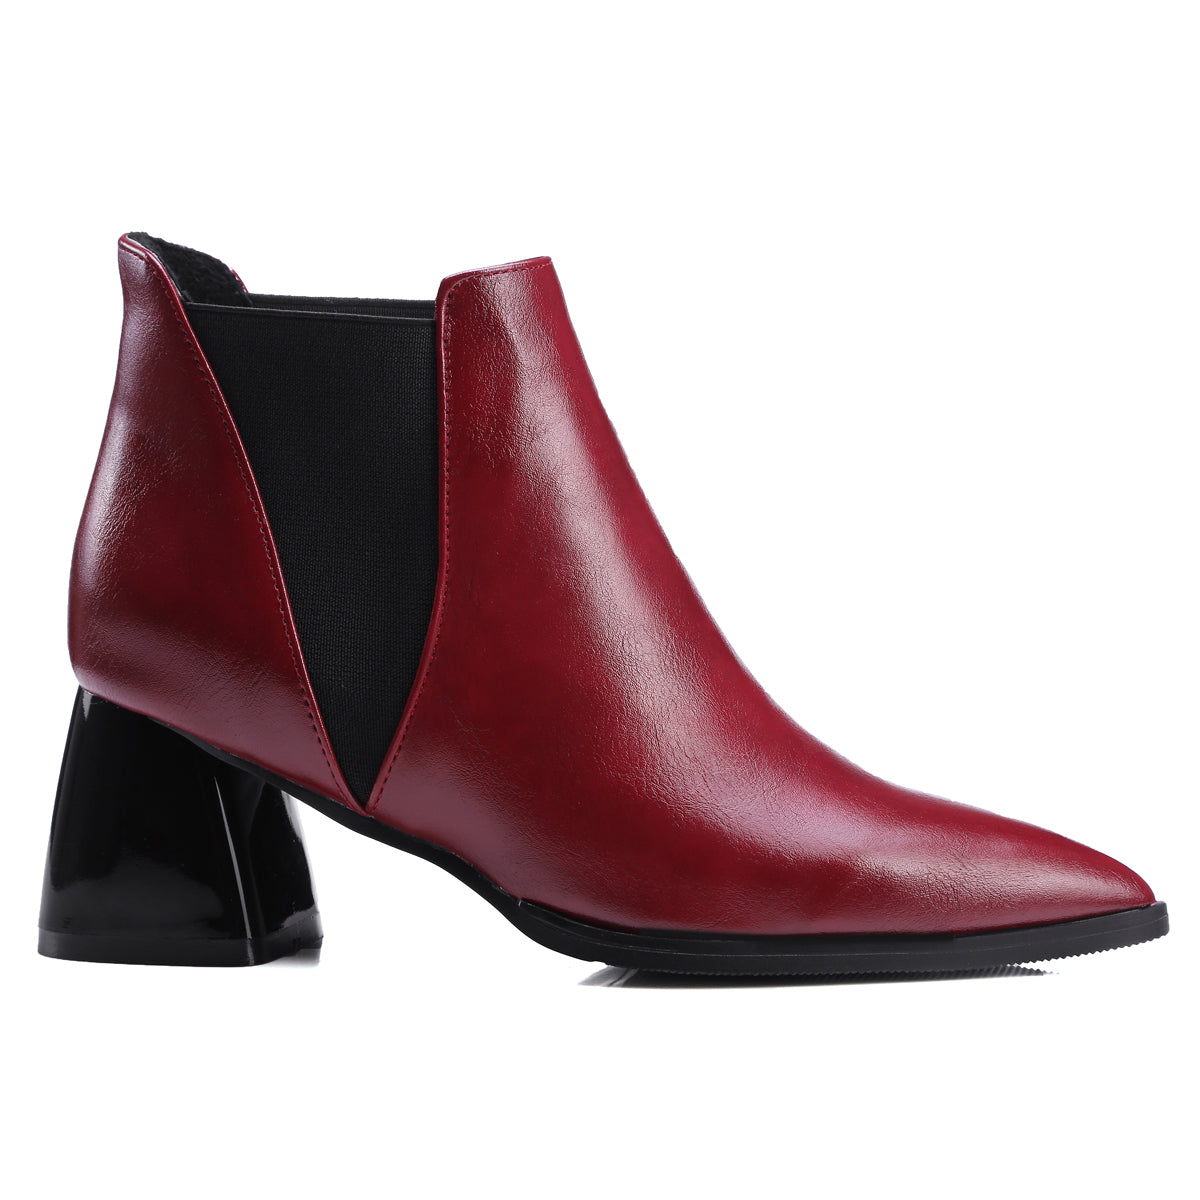 Bigsizeheels Mio magazine slip-on ankle boots with pointed toes - Red freeshipping - bigsizeheel®-size5-size15 -All Plus Sizes Available!